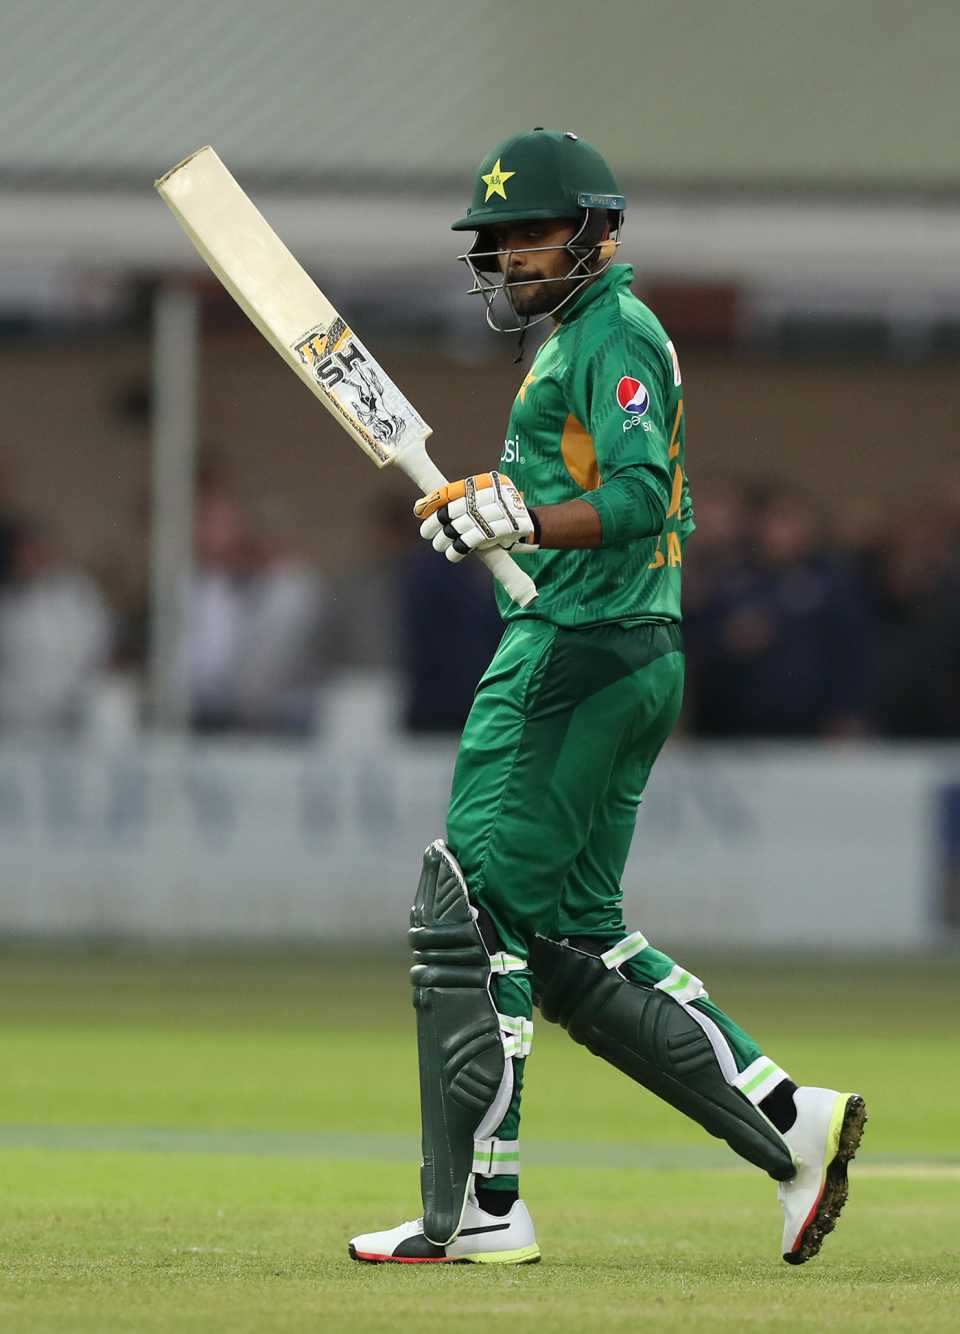 Babar Azam made a century in the tour match at Grace Road, Leicestershire v Pakistan XI, Tour match, Grace Road, May 1, 2019